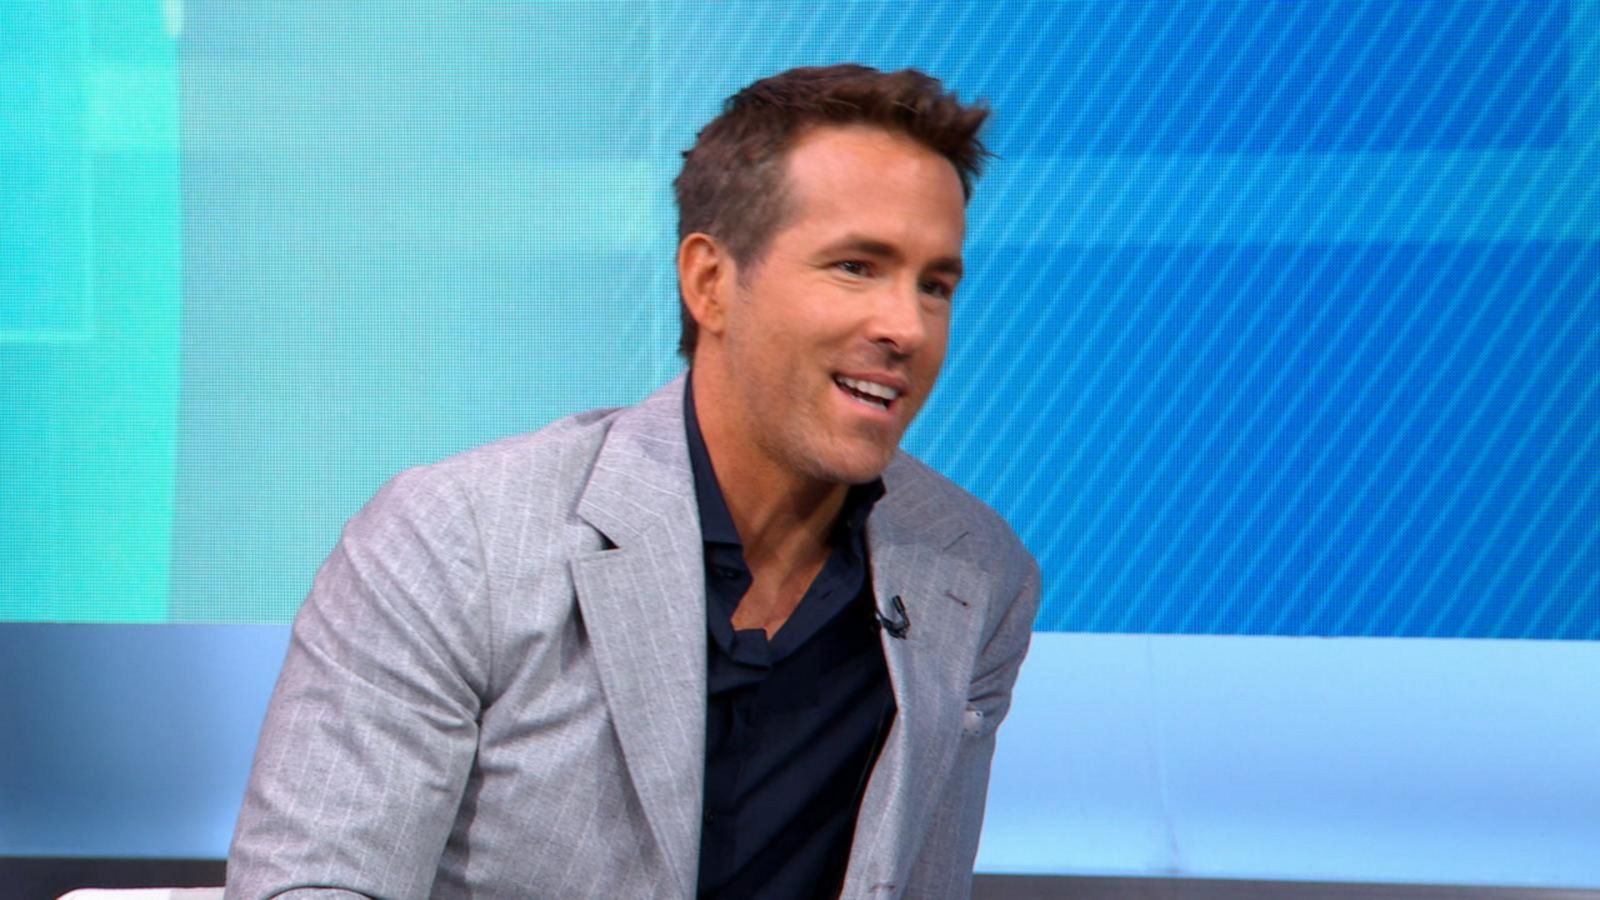 Manila Life: Ryan Reynolds tries to fit in despite being a misfit in “THE  VOICES”